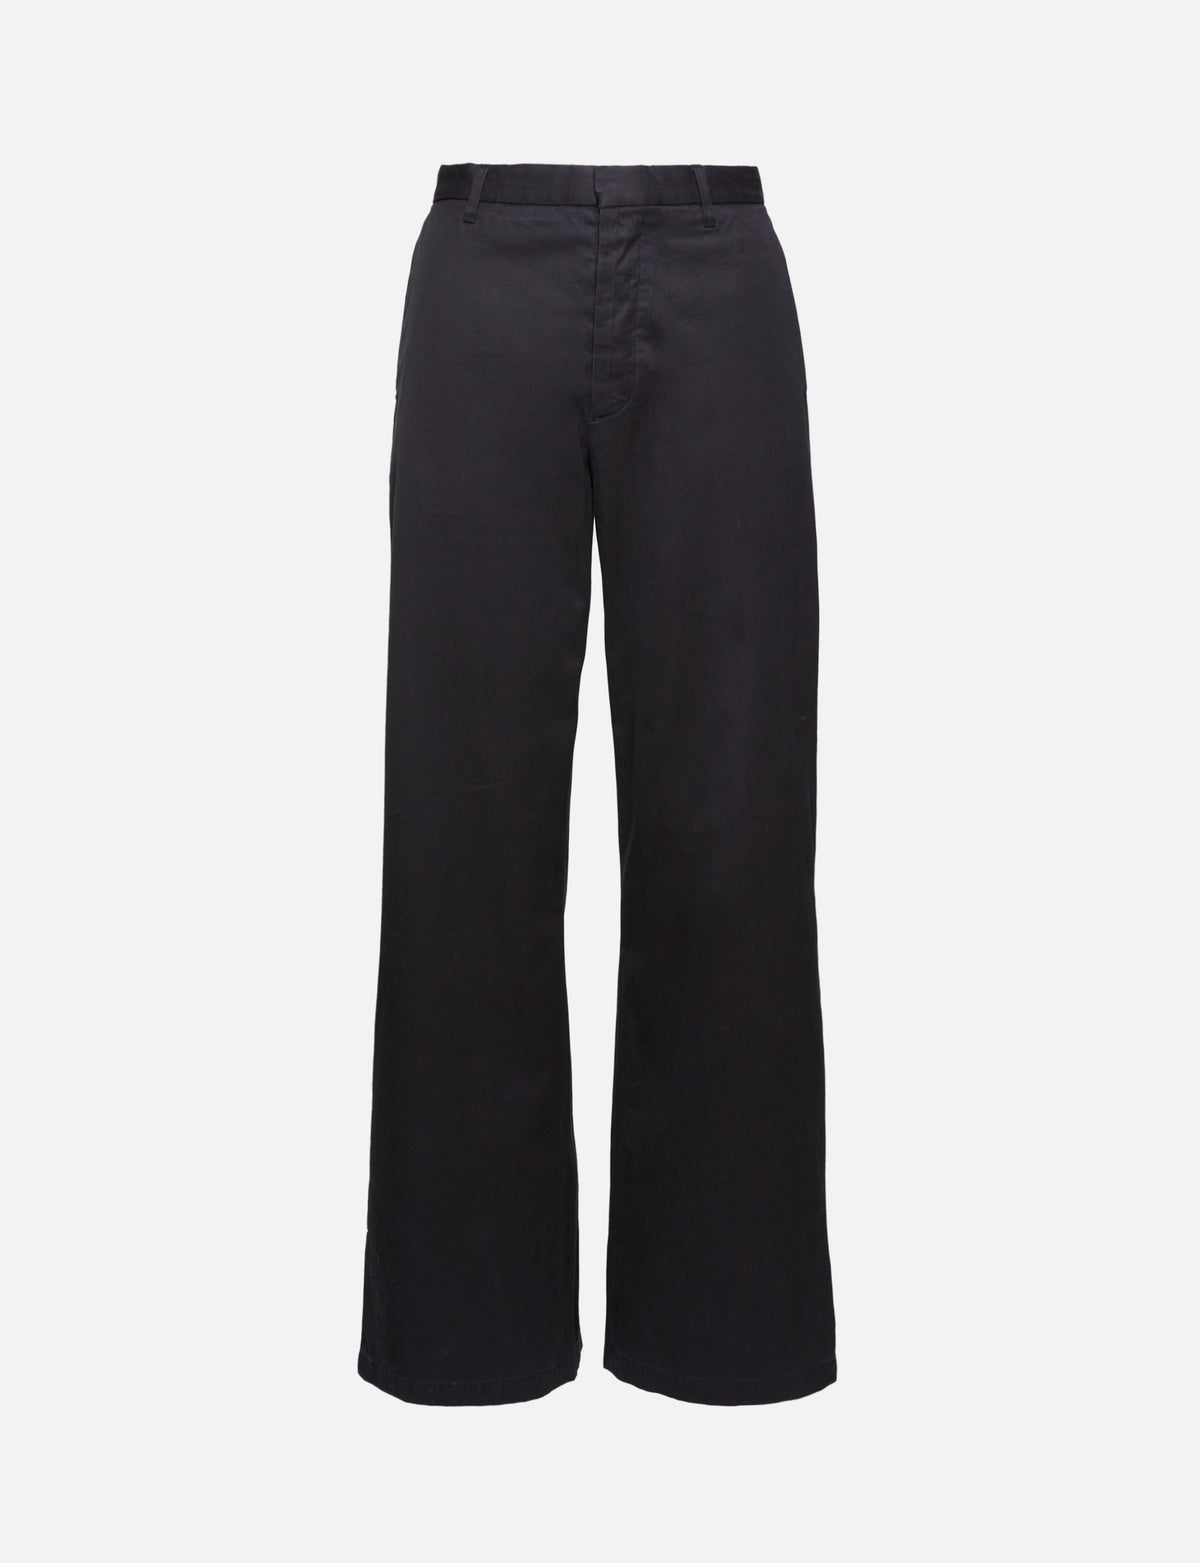 view 1 - Trench Trouser